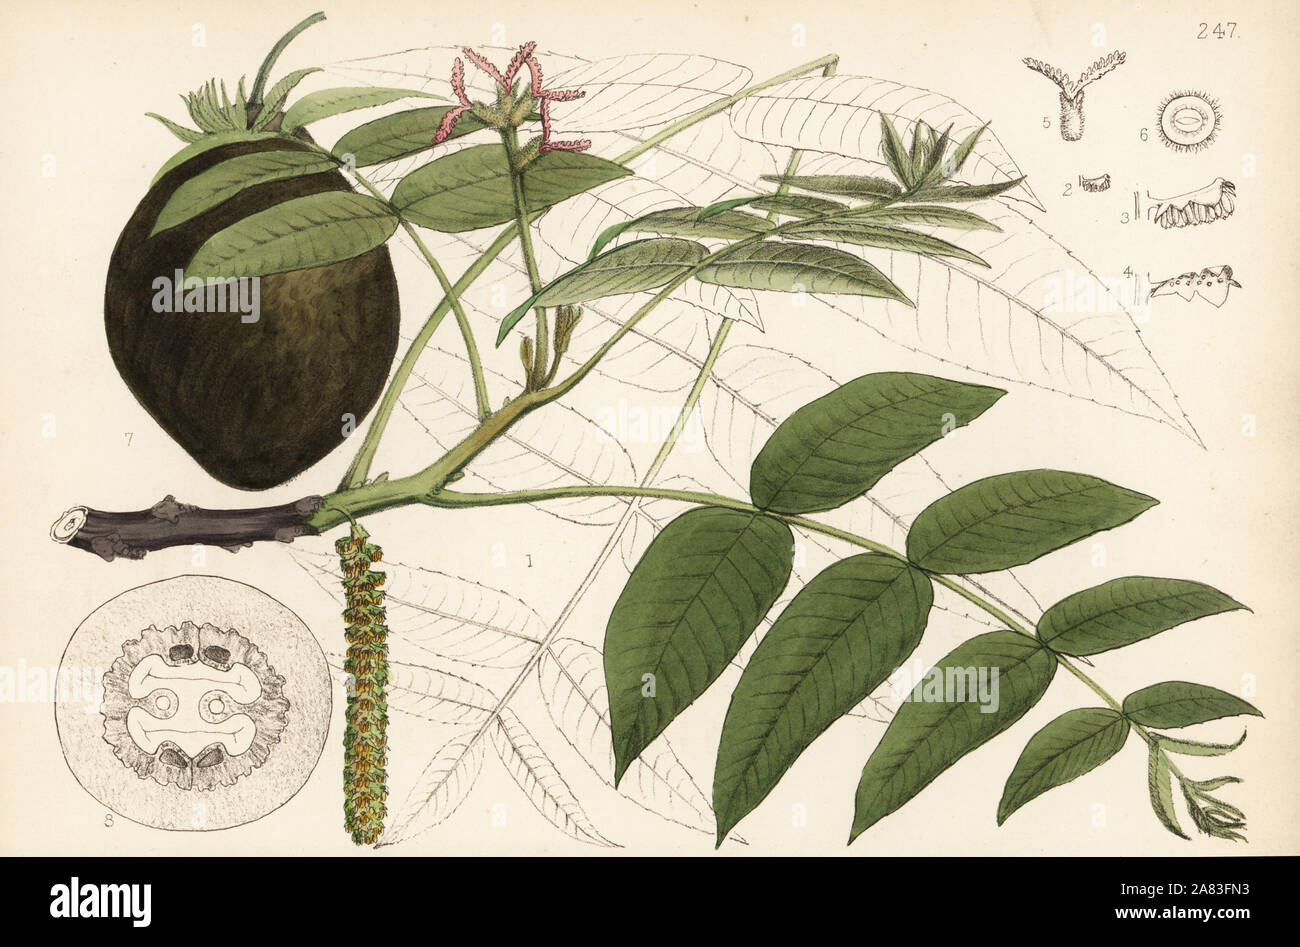 Butternut, white walnut or oil-nut, Juglans cinerea. Handcoloured lithograph by Hanhart after a botanical illustration by David Blair from Robert Bentley and Henry Trimen's Medicinal Plants, London, 1880. Stock Photo